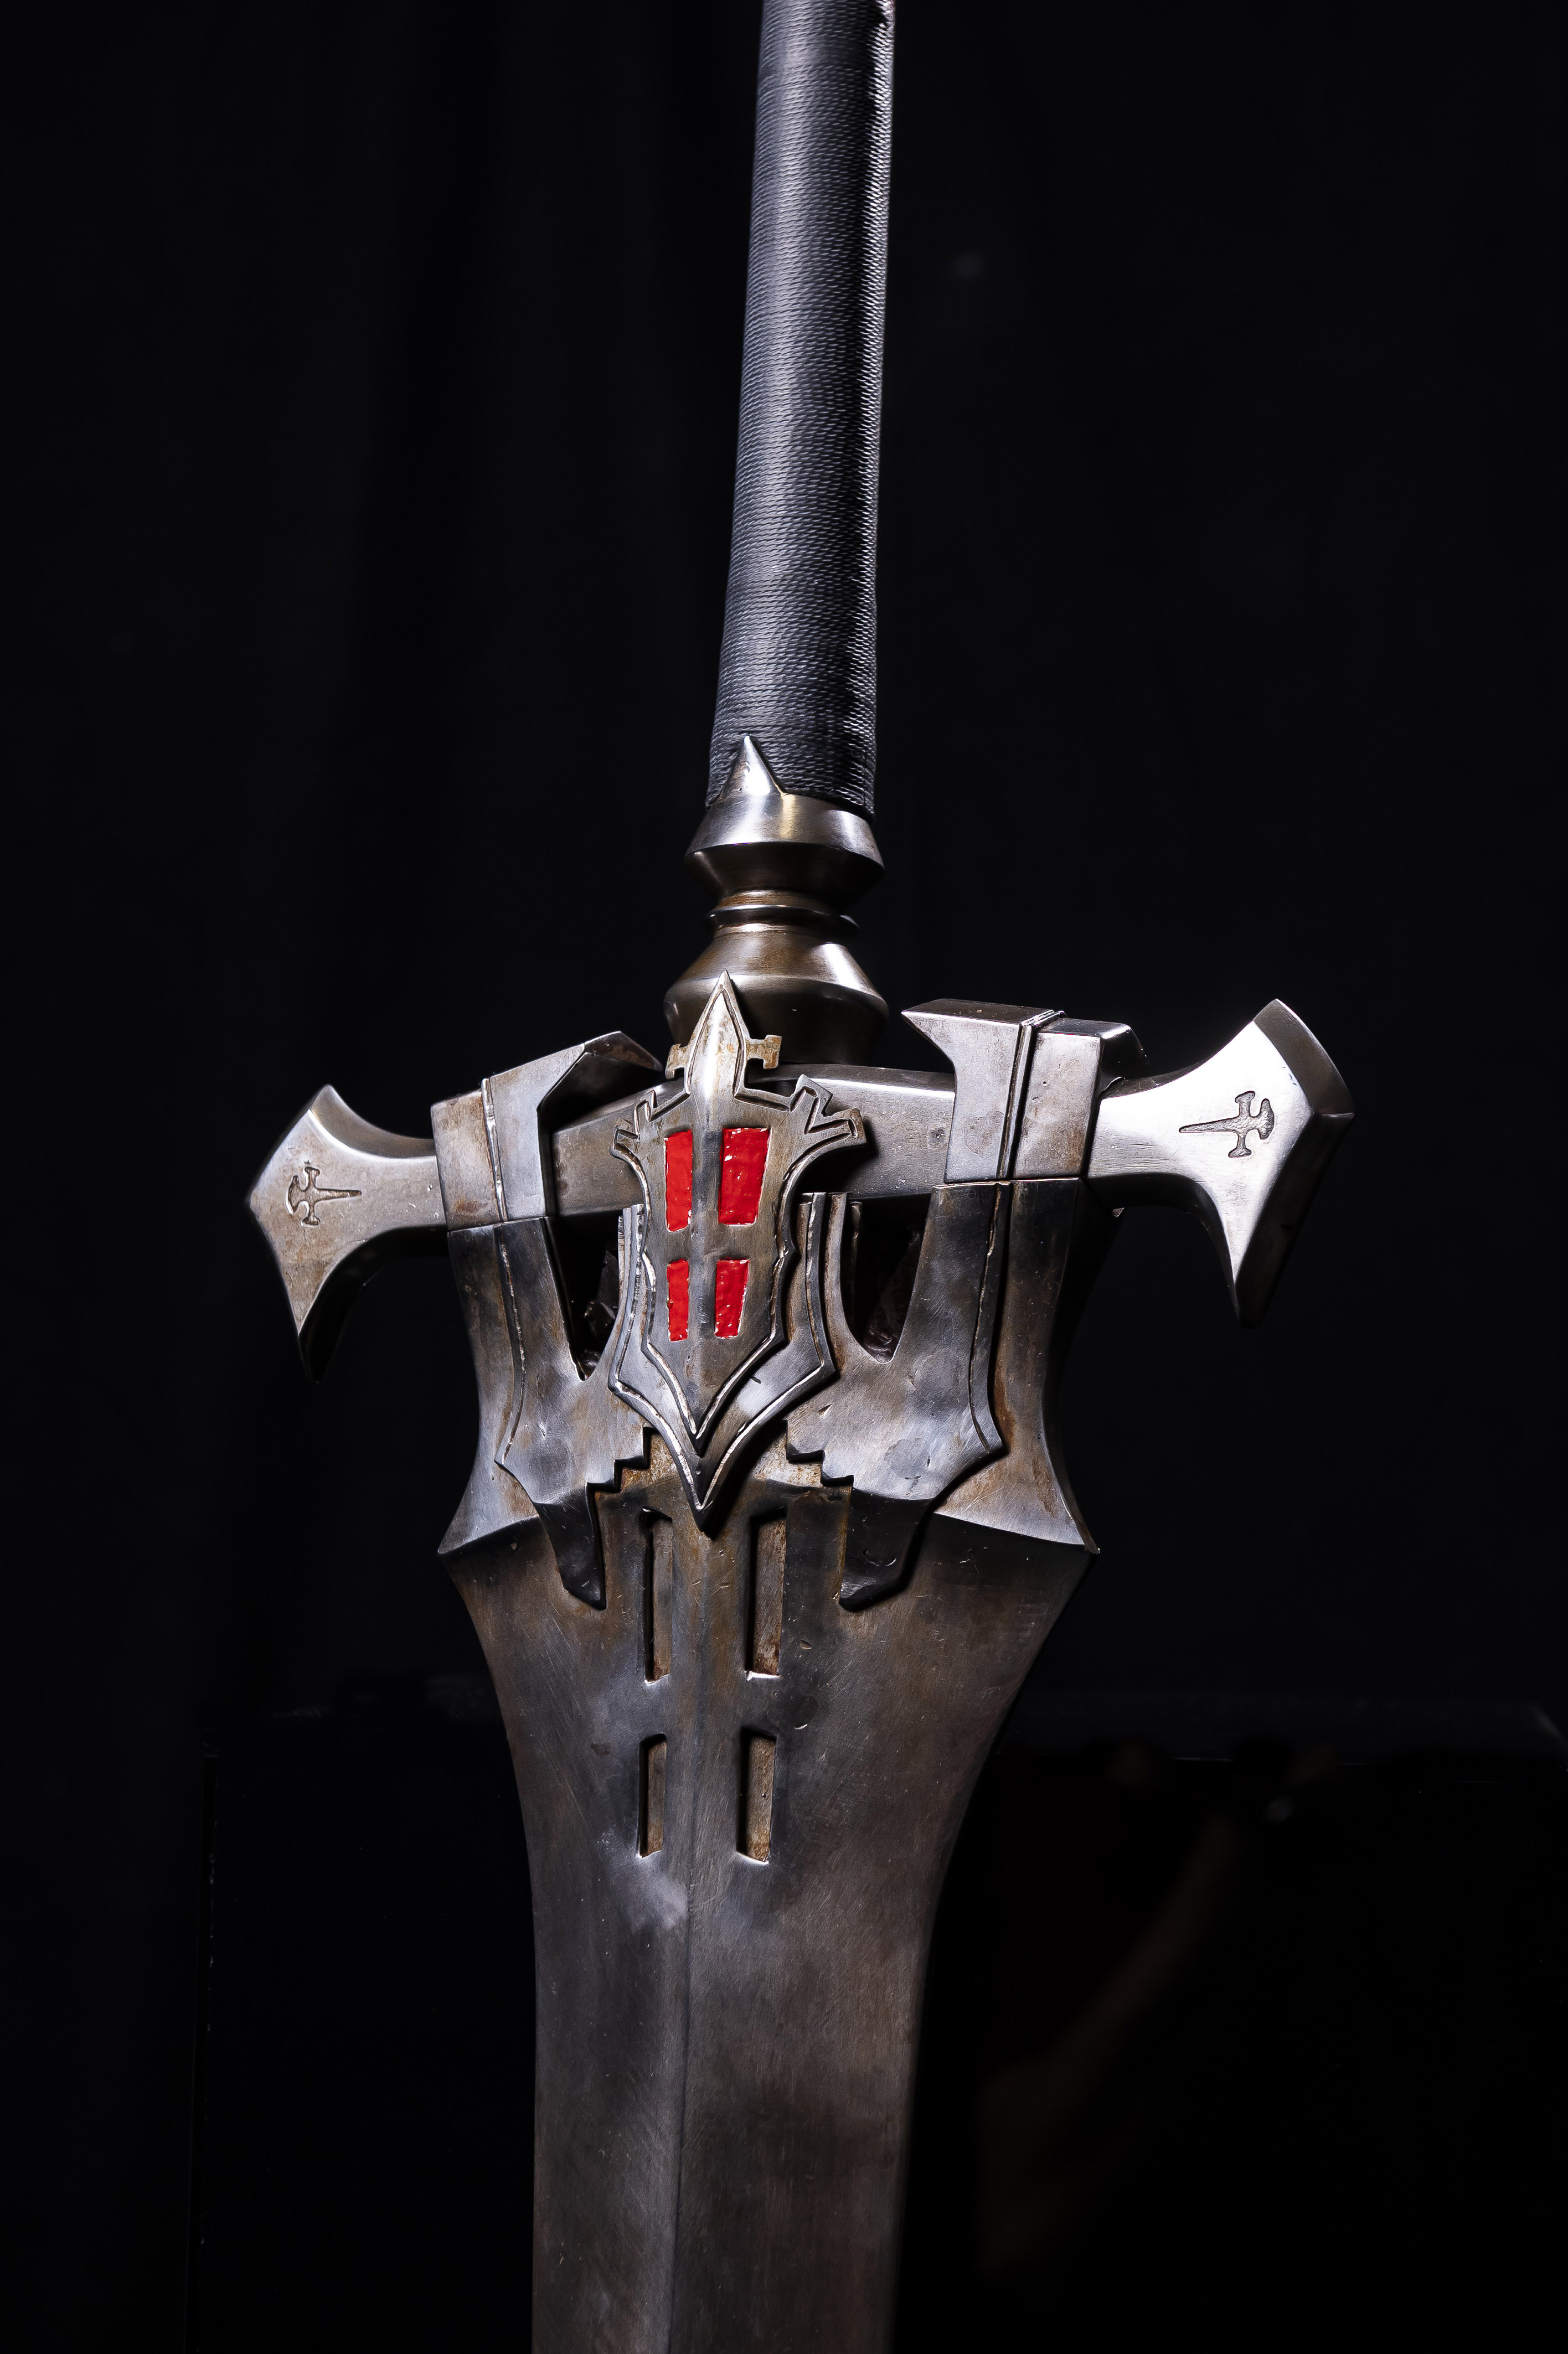 A real world version of the Final Fantasy 16 sword Invictus.